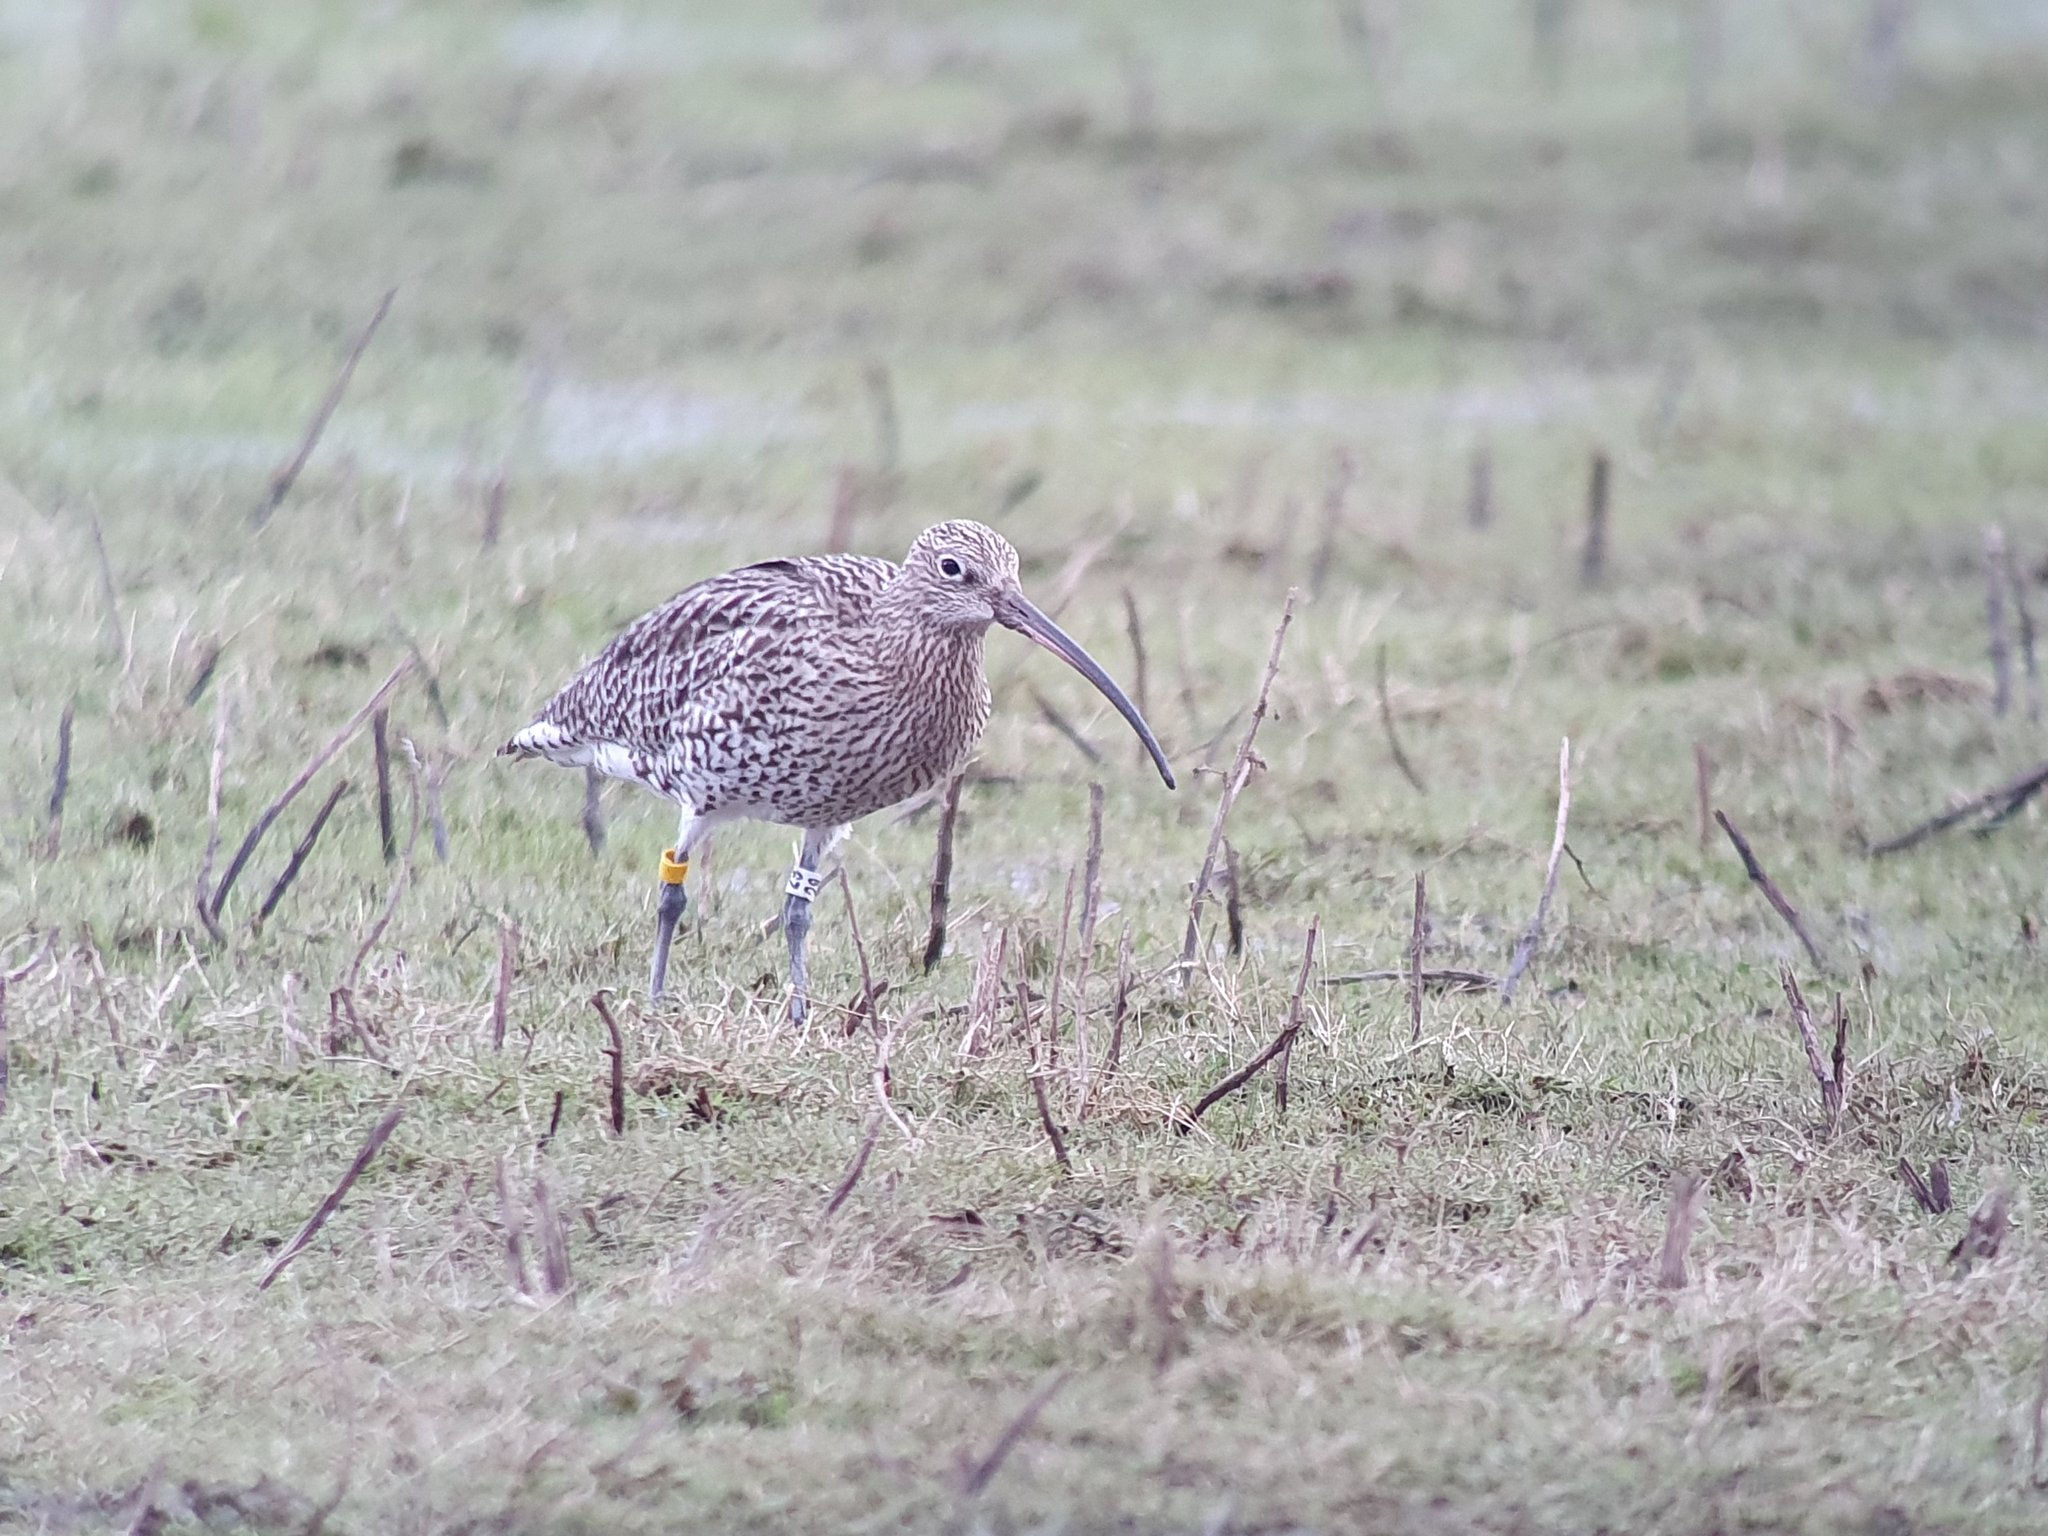 Look out for Curlew